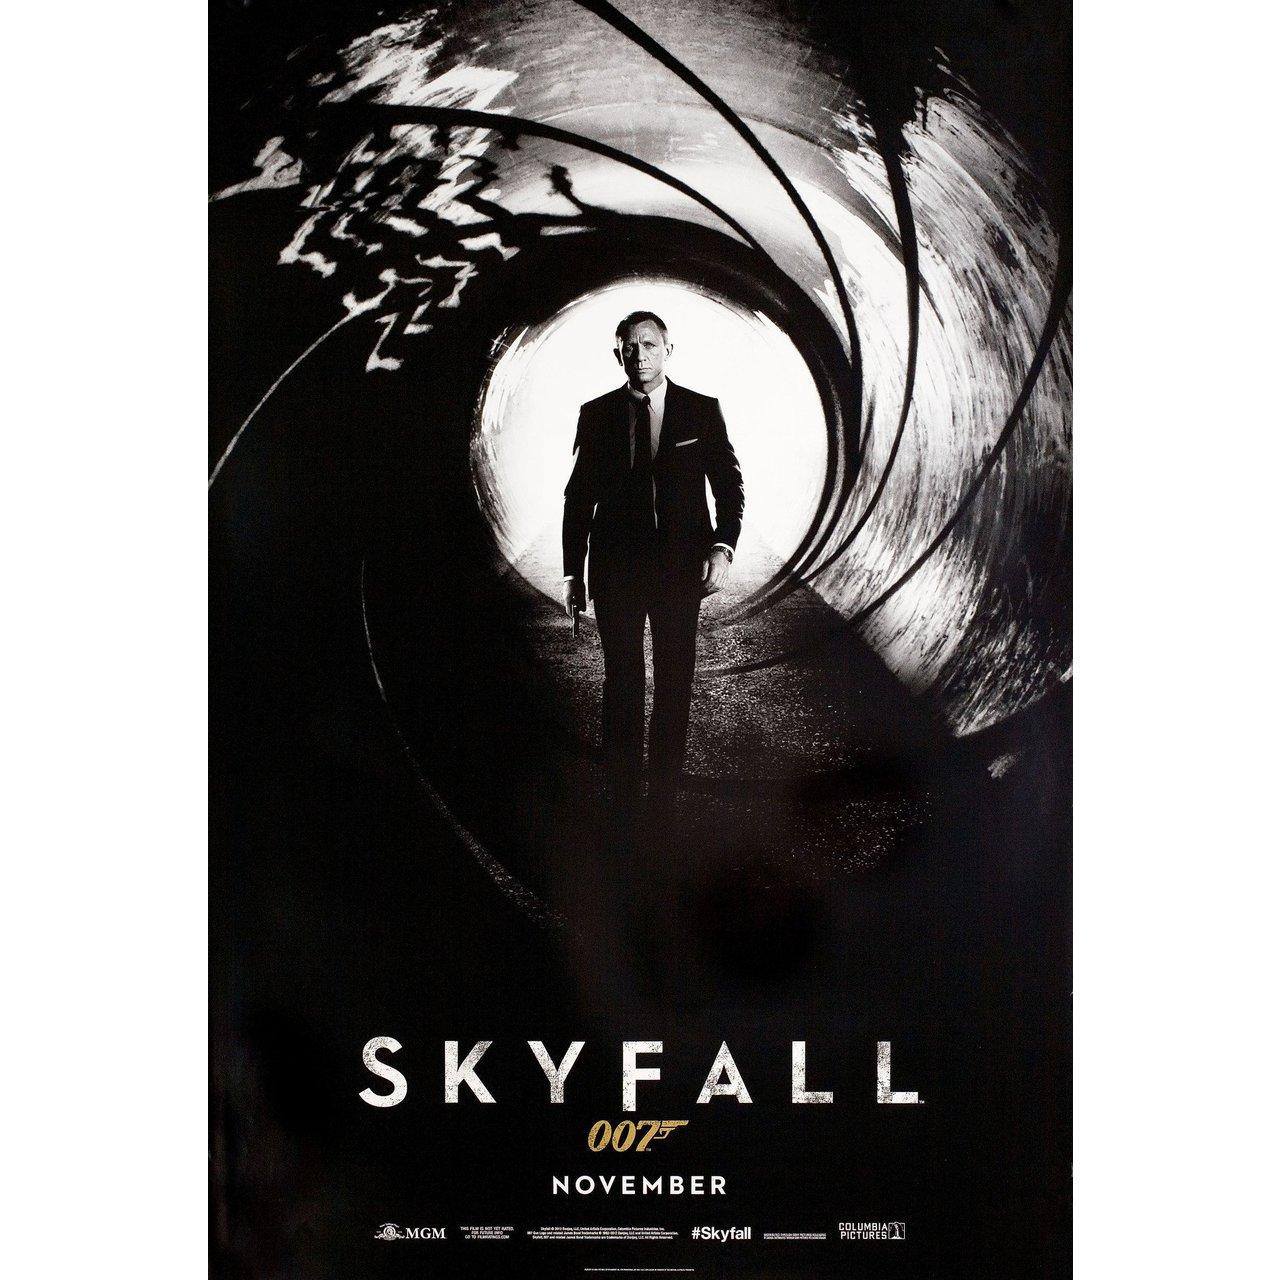 Original 2012 U.S. one sheet poster for the film Skyfall directed by Sam Mendes with Daniel Craig / Judi Dench / Javier Bardem / Ralph Fiennes. Very good-fine condition, rolled. Please note: the size is stated in inches and the actual size can vary